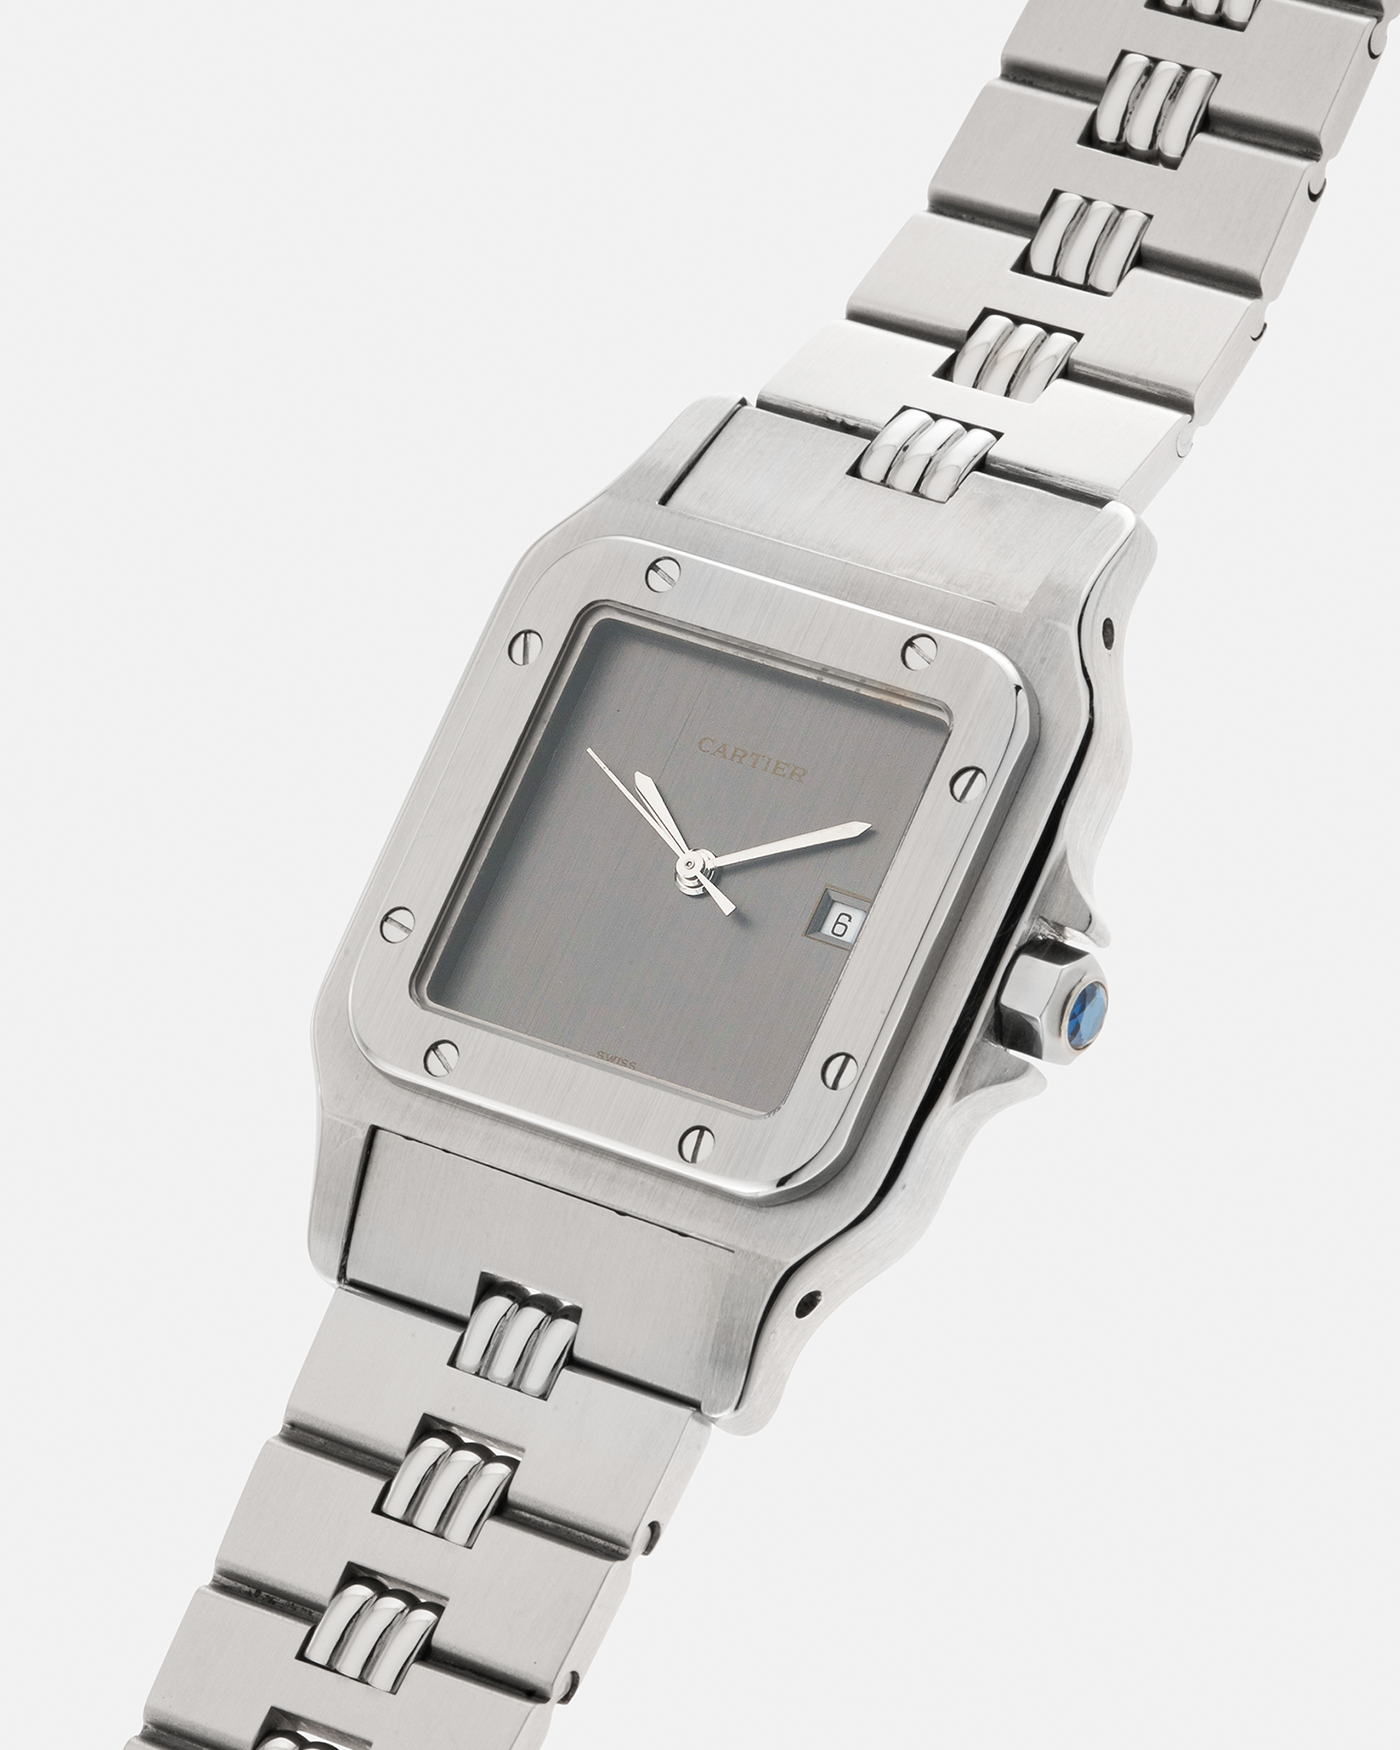 Brand: Cartier Year: 1980s Model: Santos ‘Carrée’ Reference: 2960 Material: Stainless Steel Movement: Cartier Cal. 077 (ETA Cal. 3671 Based), Self-Winding Case Dimensions: 29mm x 40.5mm Lug Width: 18mm Strap: Cartier Stainless Steel Godron ‘541811’ Bracelet with Signed Clasp